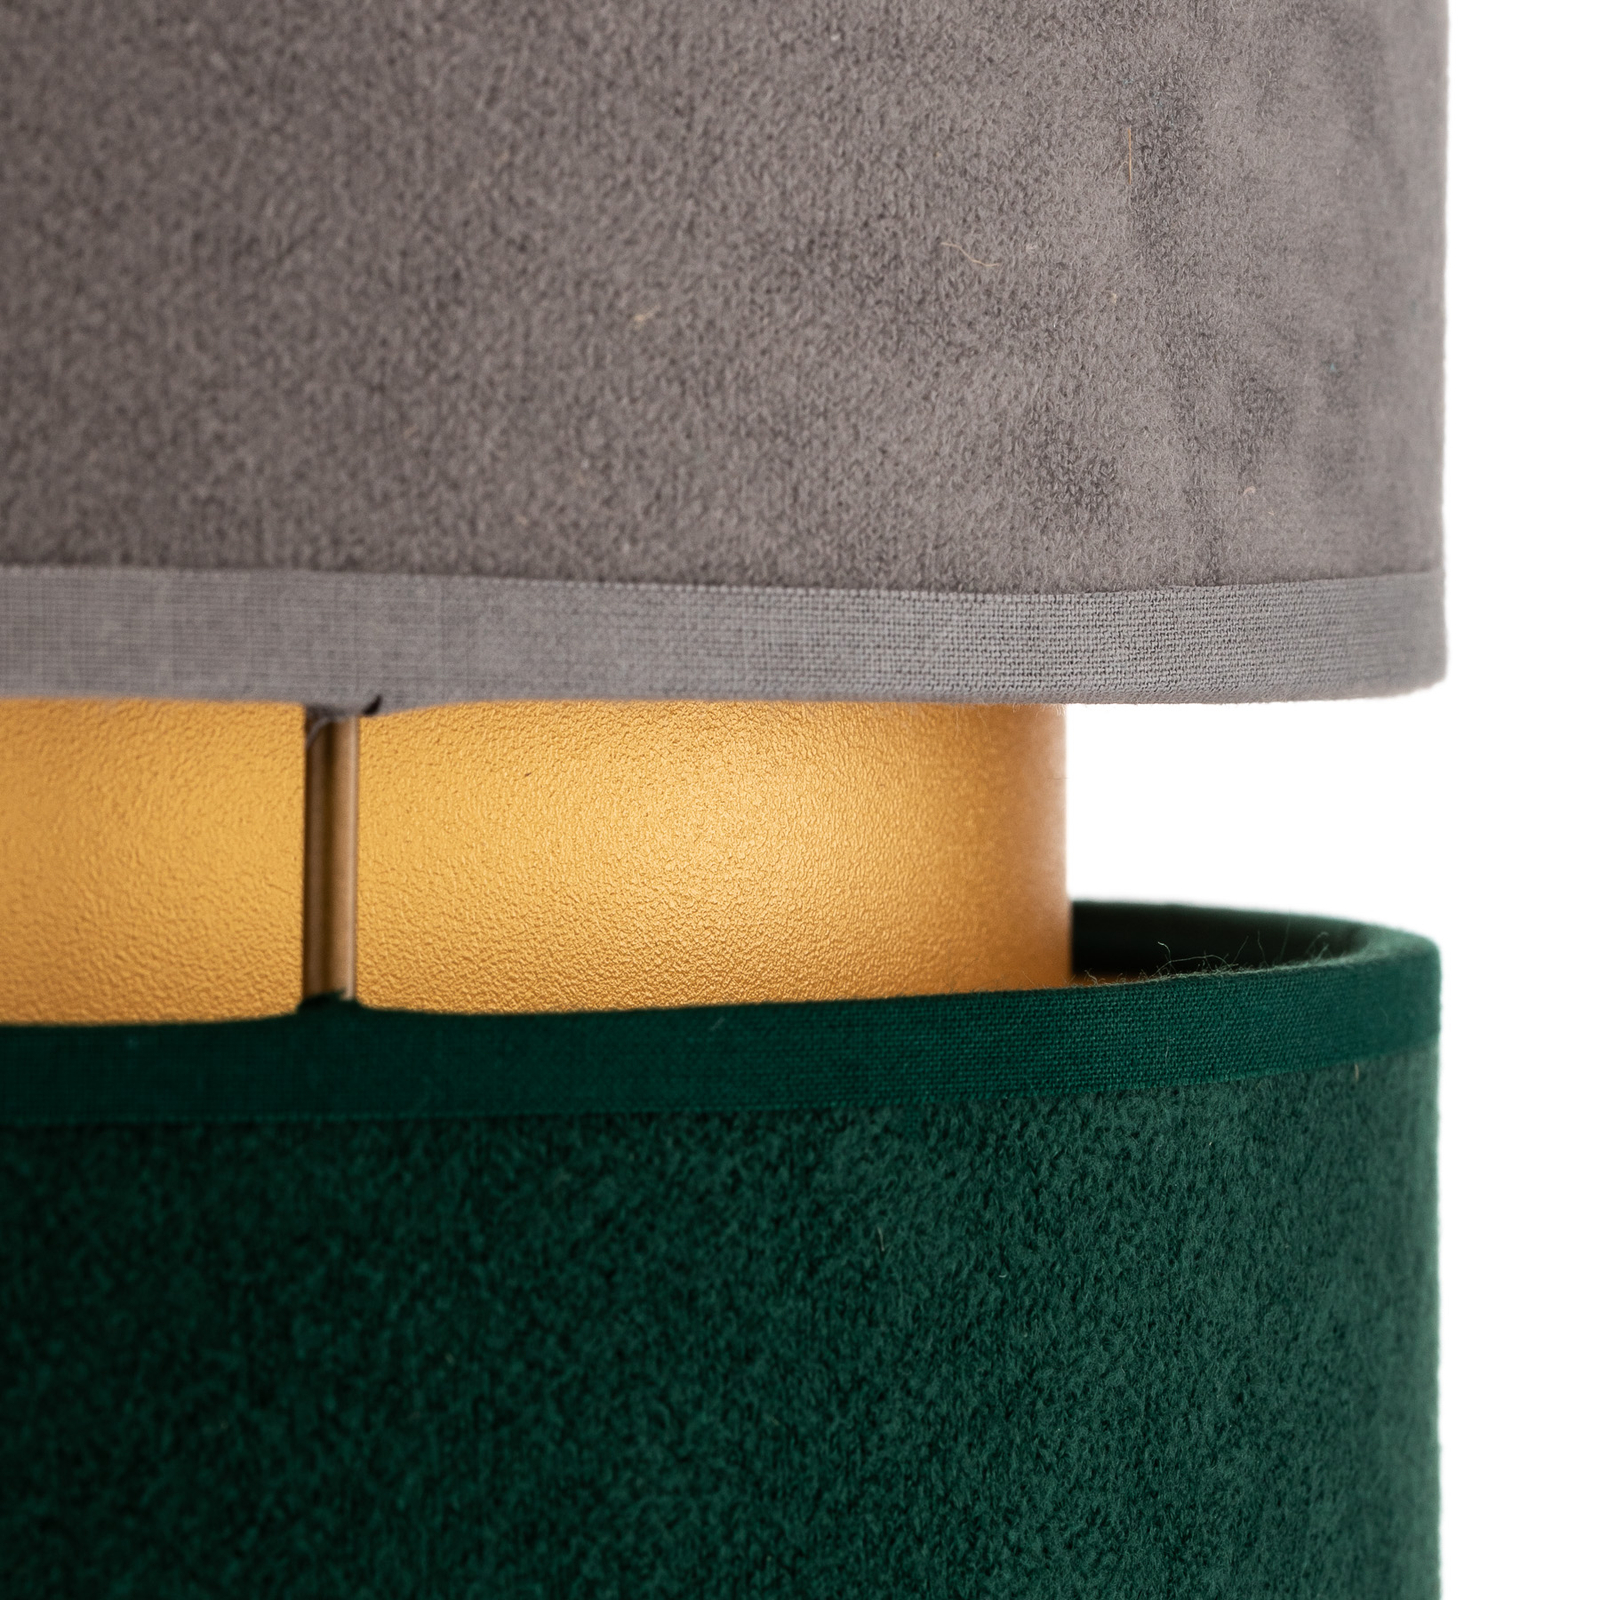 Golden Duo table lamp grey/green/gold height 50 cm